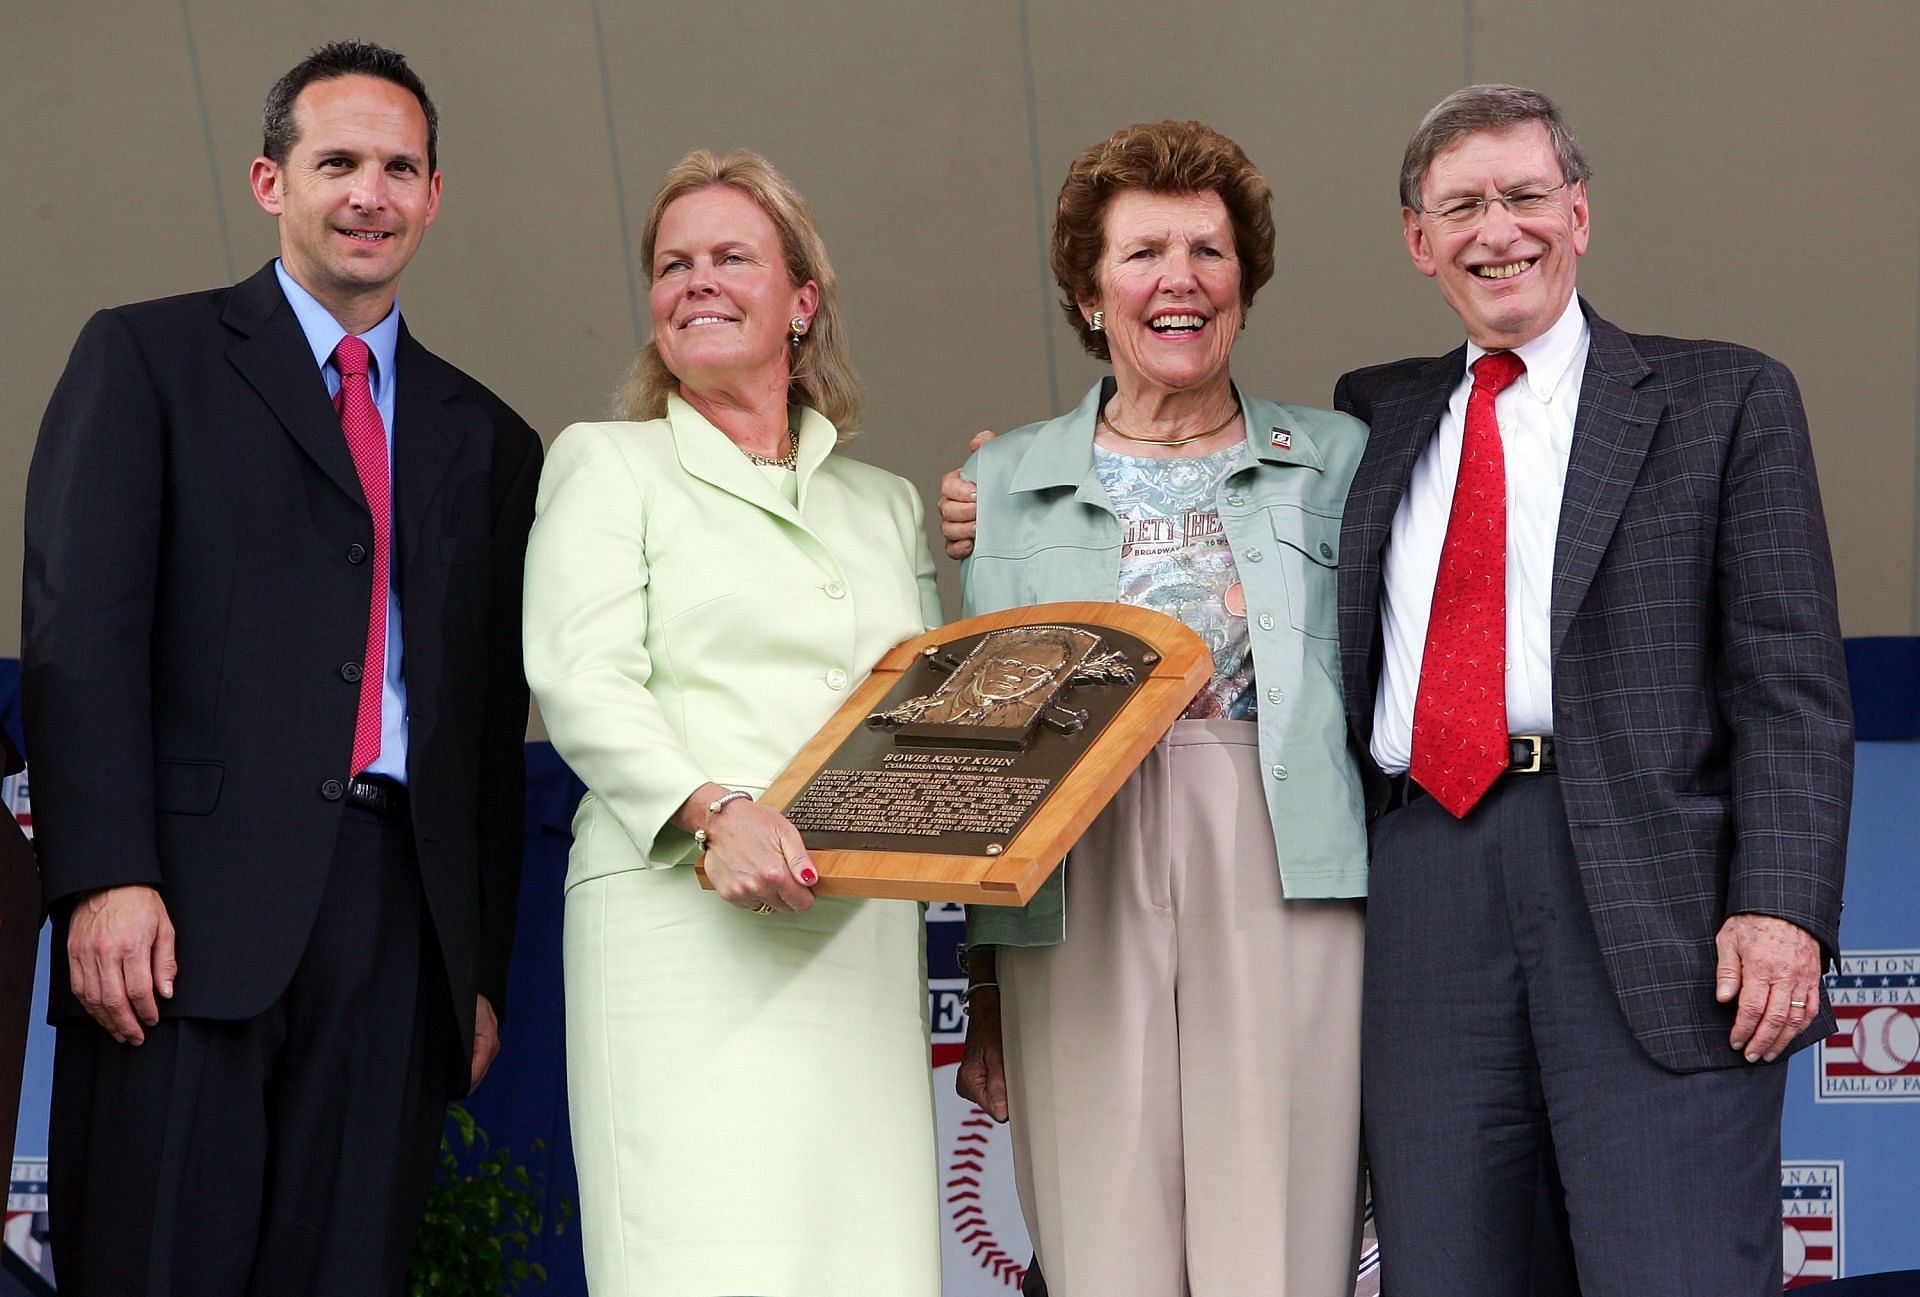 Baseball Hall of Fame Induction Ceremony (Photo by Jim McIsaac/Getty Images)